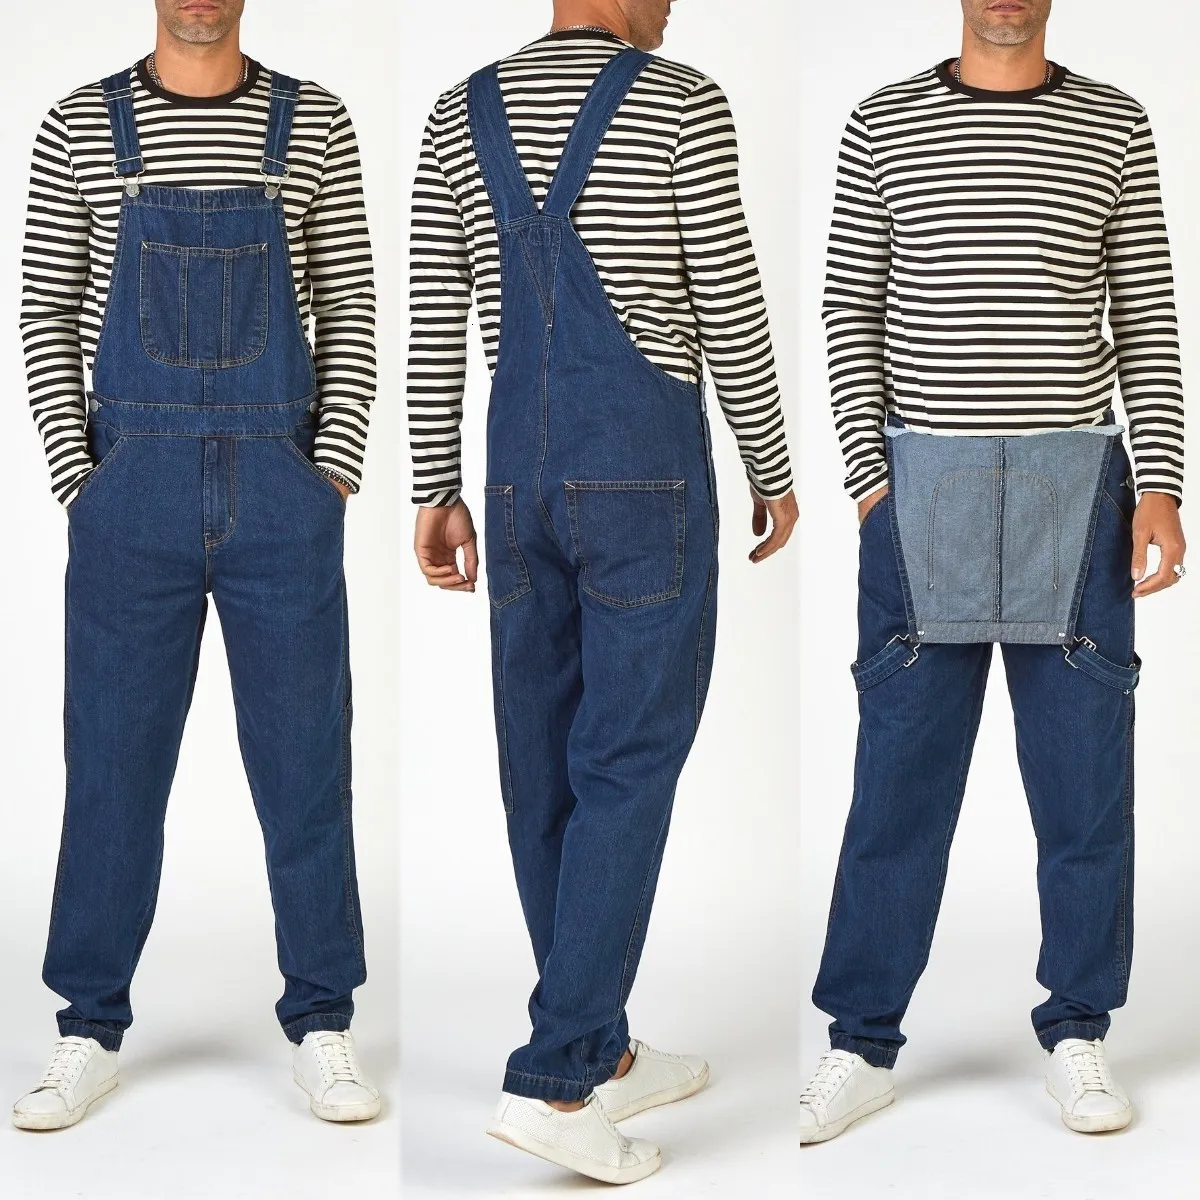 Mens Denim Jeans With Straps, Suspenders, And Revice Denim Jumpsuit Style  From Thombrowne8, $57.75 | DHgate.Com